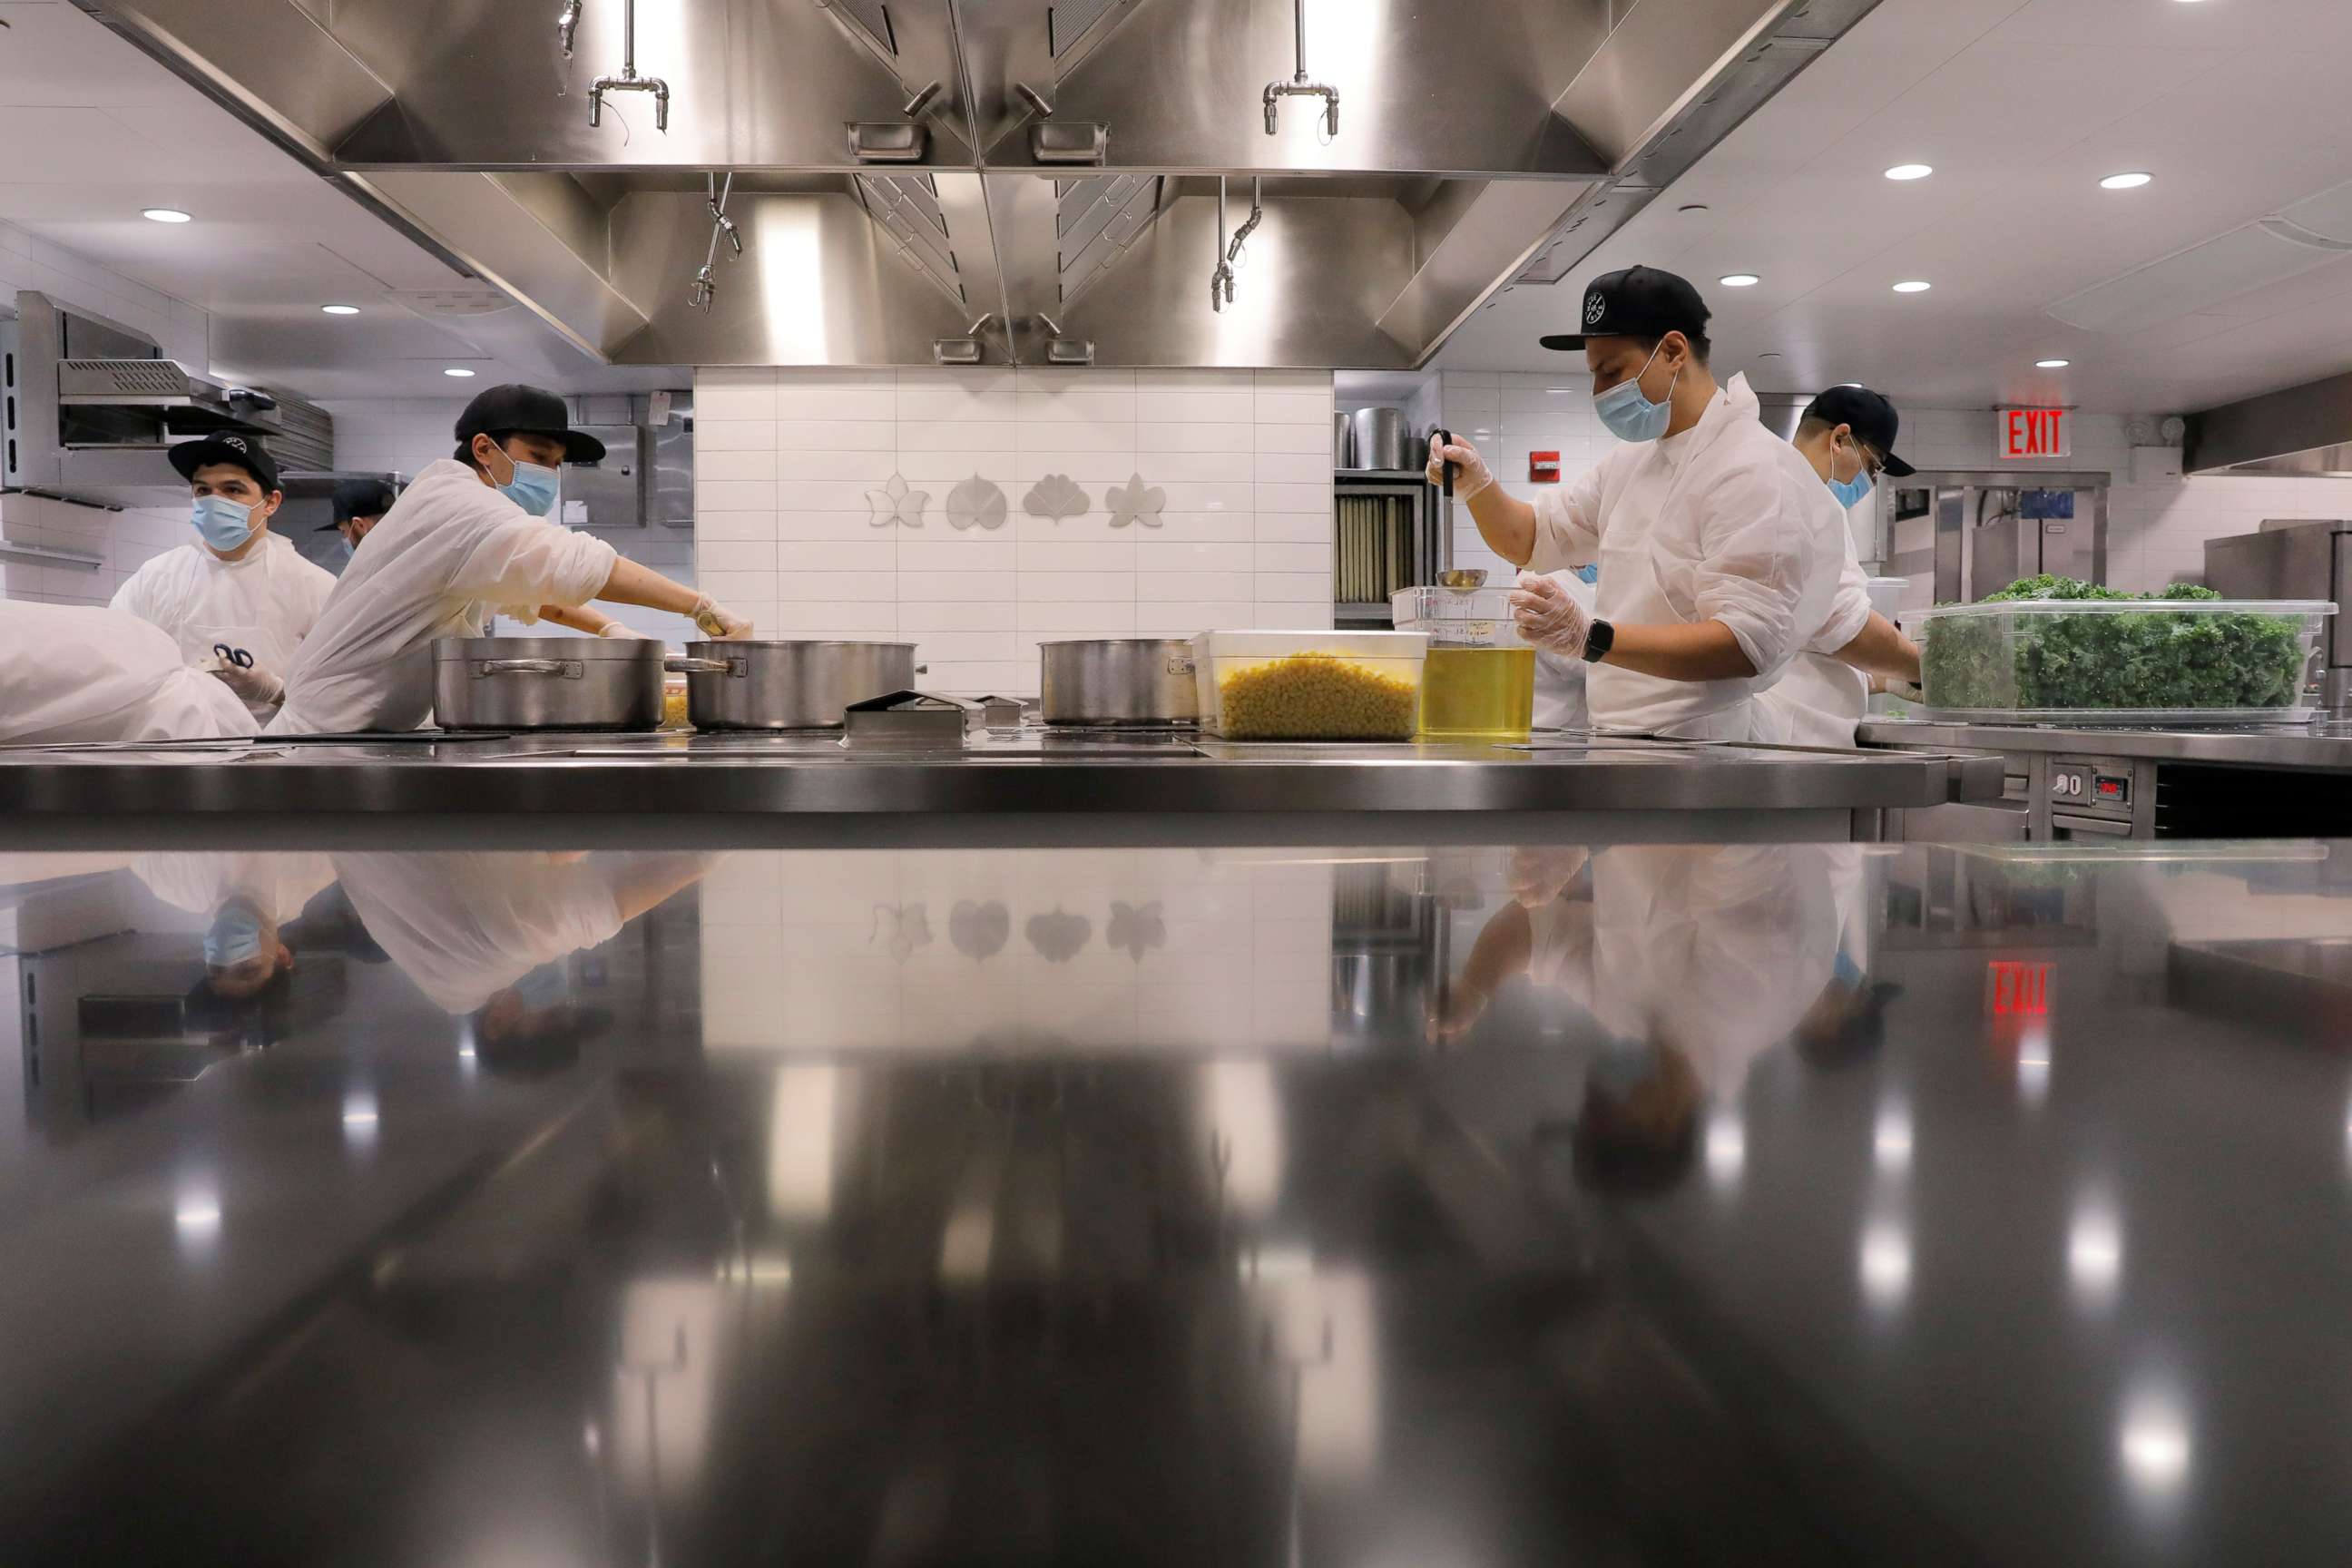 PHOTO: Kitchen staff work to create food donation boxes to give to needy families in the kitchen of Michelin starred restaurant Eleven Madison Park in New York, May 20, 2020.